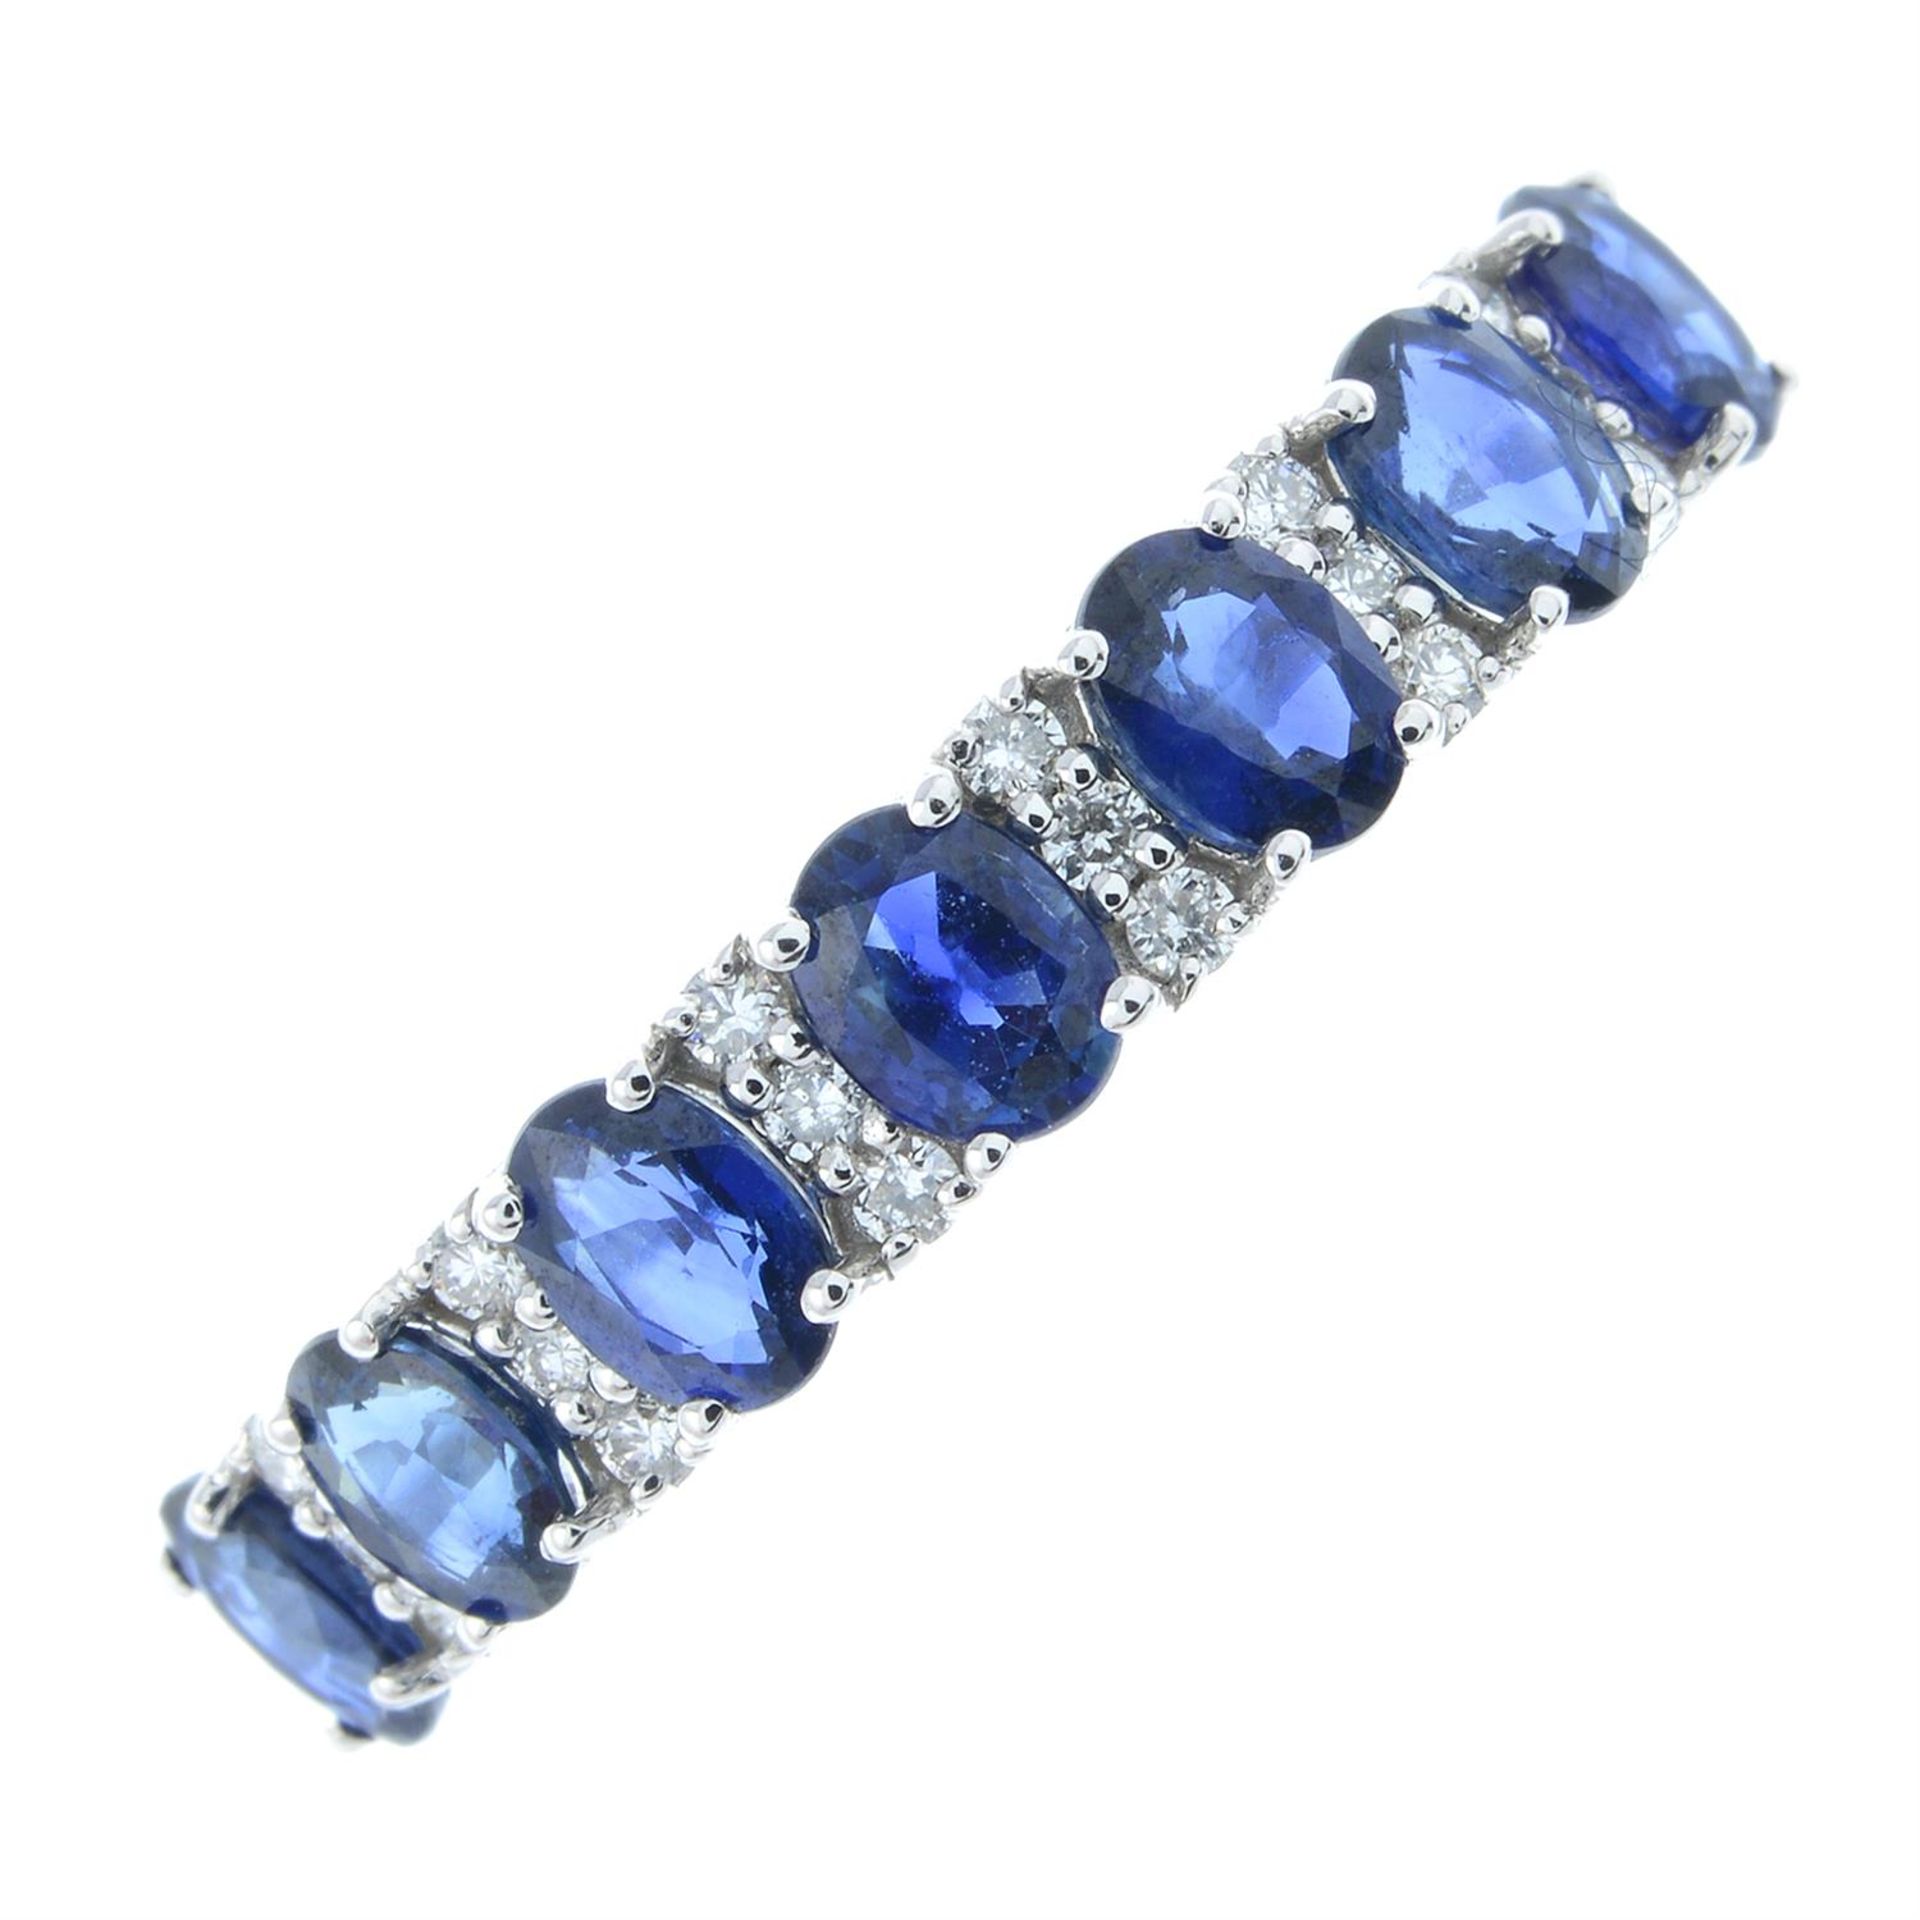 An 18ct gold sapphire and diamond half eternity ring.